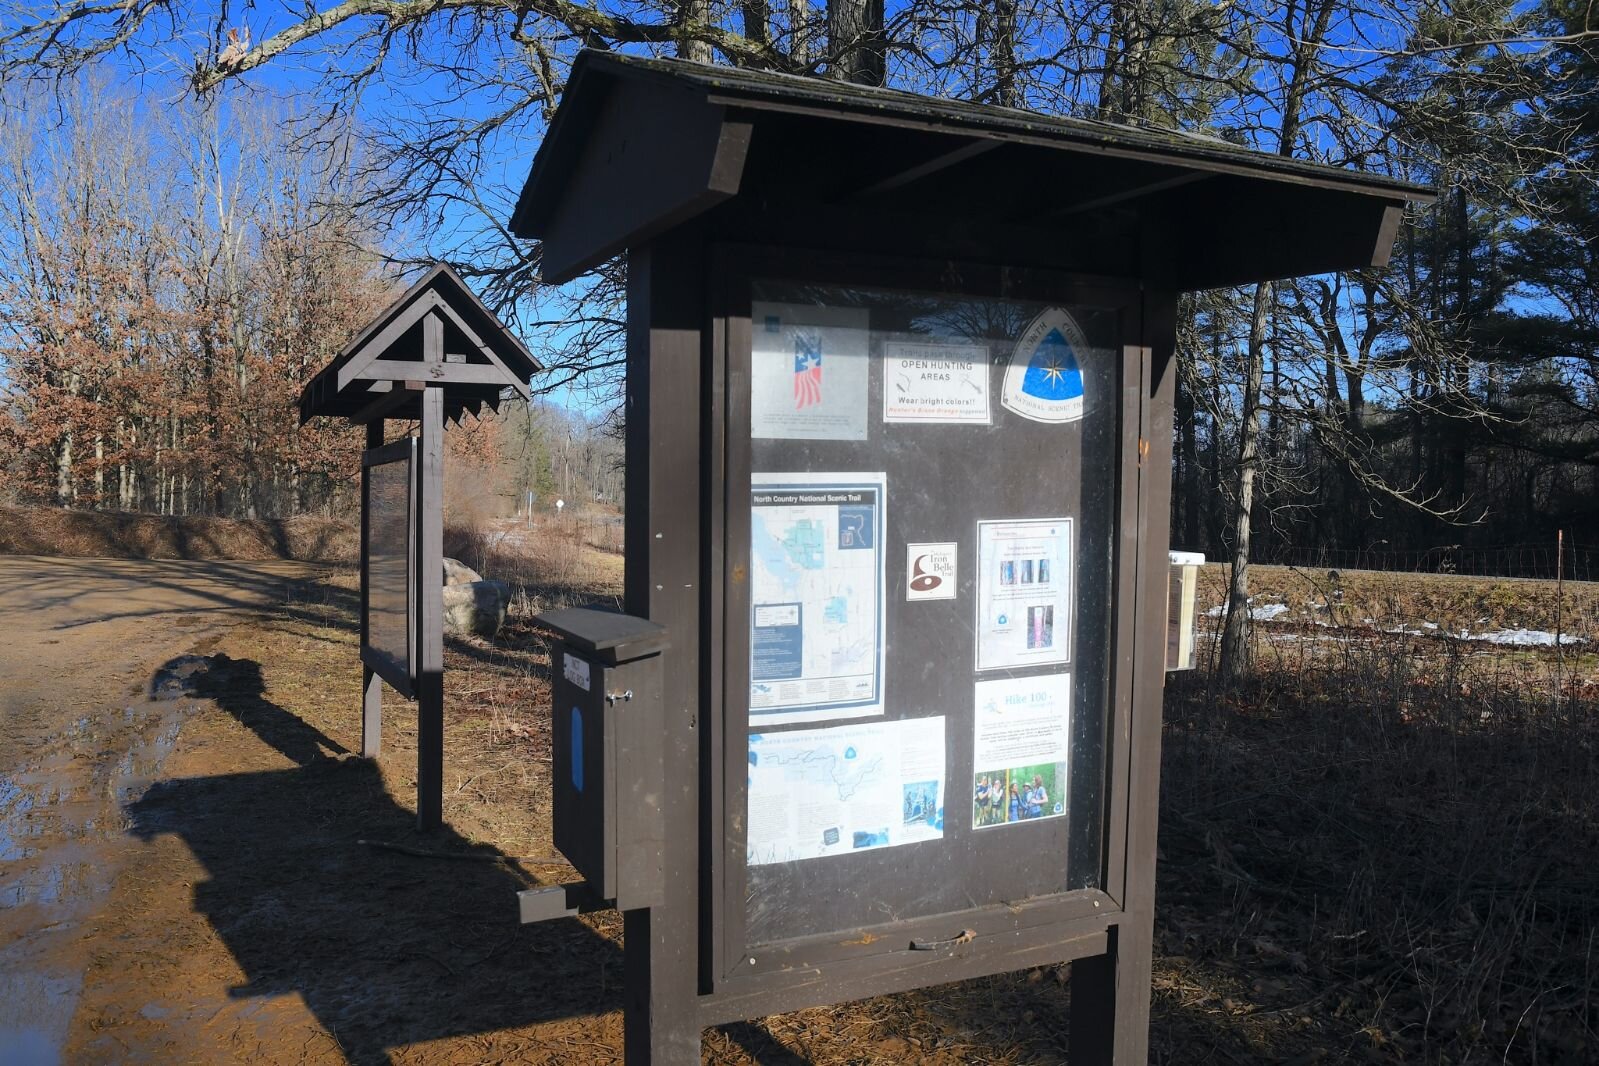 The parking lot on 42nd Street, north of the former entrance to Kellogg Forest, is also a trailhead for the North Country Trail.